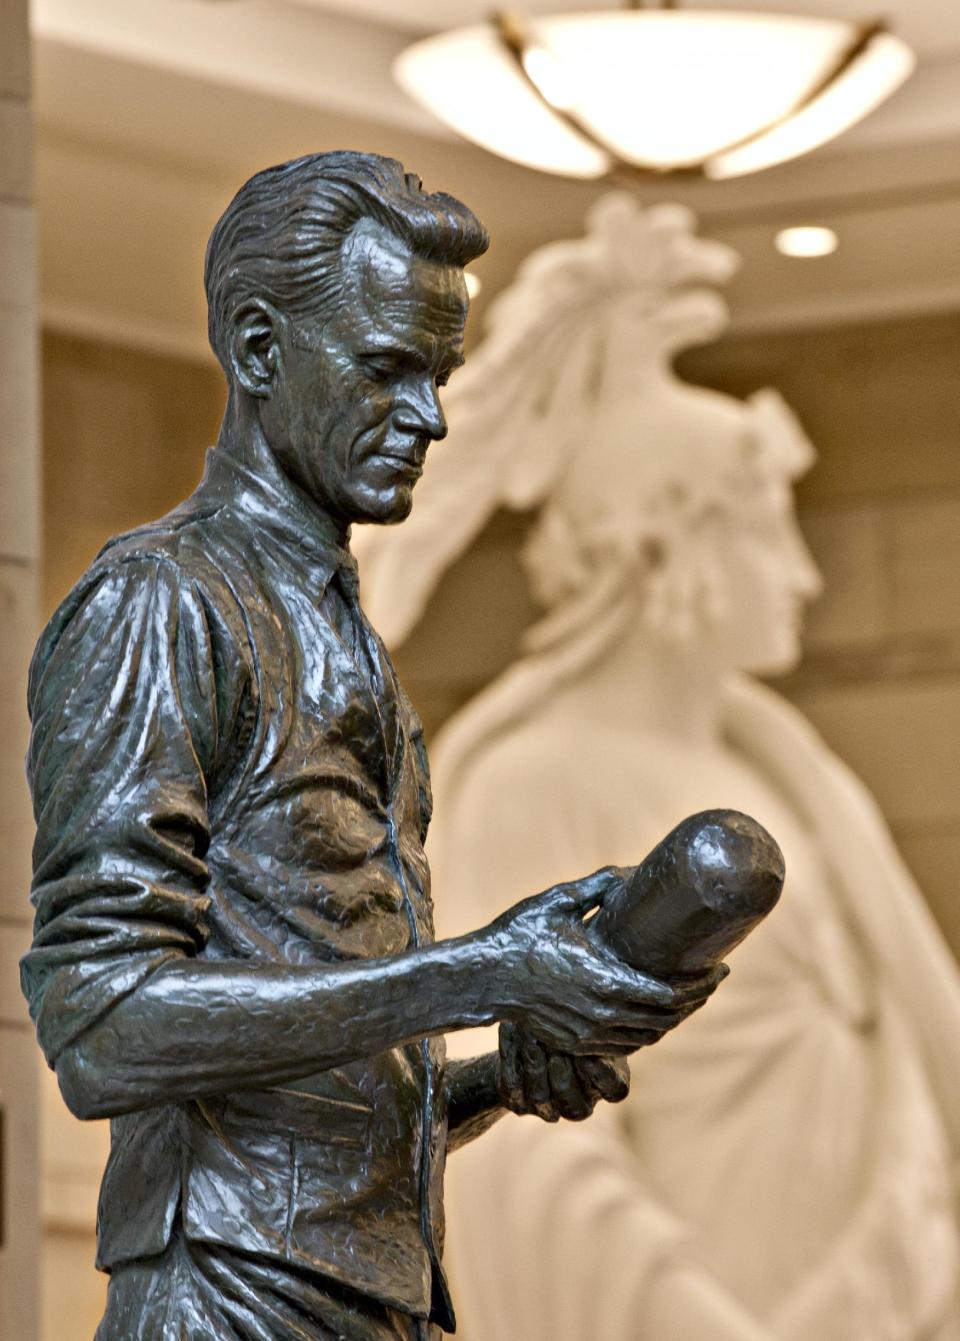 Utah's Philo T. Farnsworth, known as the "father of television," is depicted in bronze by sculptor James R. Avati holding a cathode ray tube, at the Capitol Visitors Center in Washington, Tuesday, July 2, 2013. All summer, thousands of visitors traipse among the U.S. Capitol’s many statues, which honor the nation’s founders, leaders and legends. (AP Photo/J. Scott Applewhite)